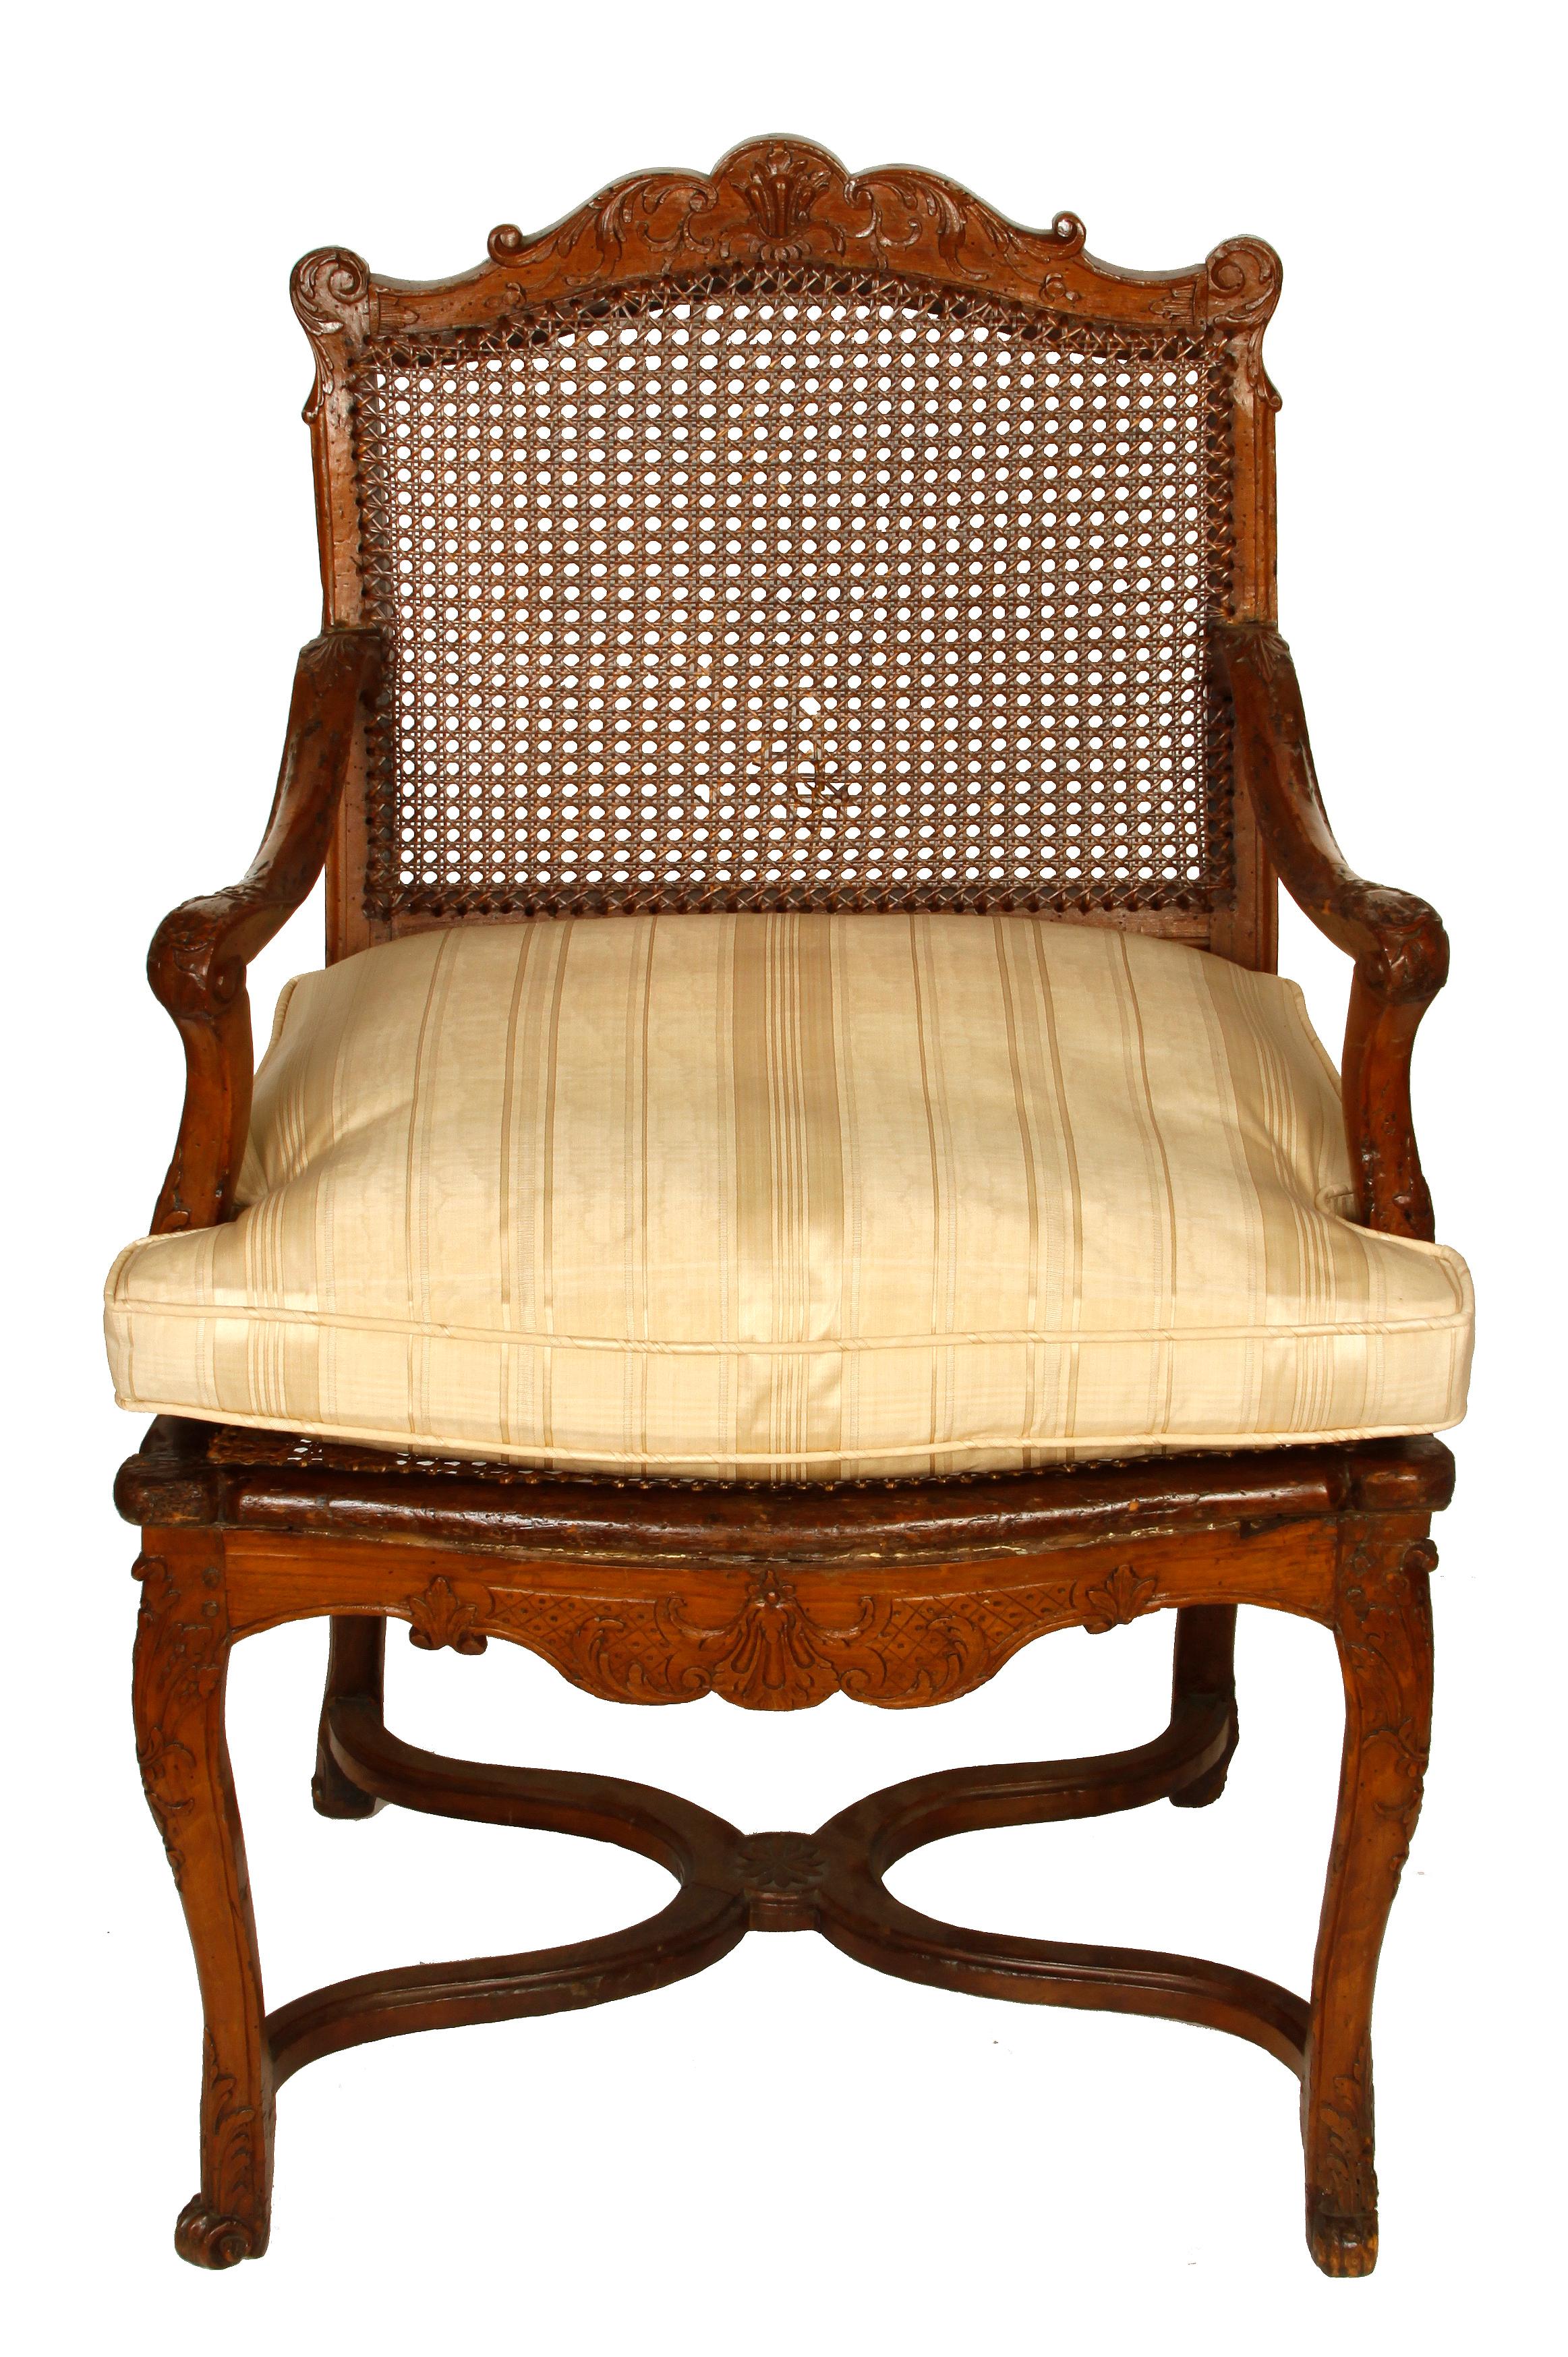 Regency Regence Style Caned Fauteuil with Cushion For Sale